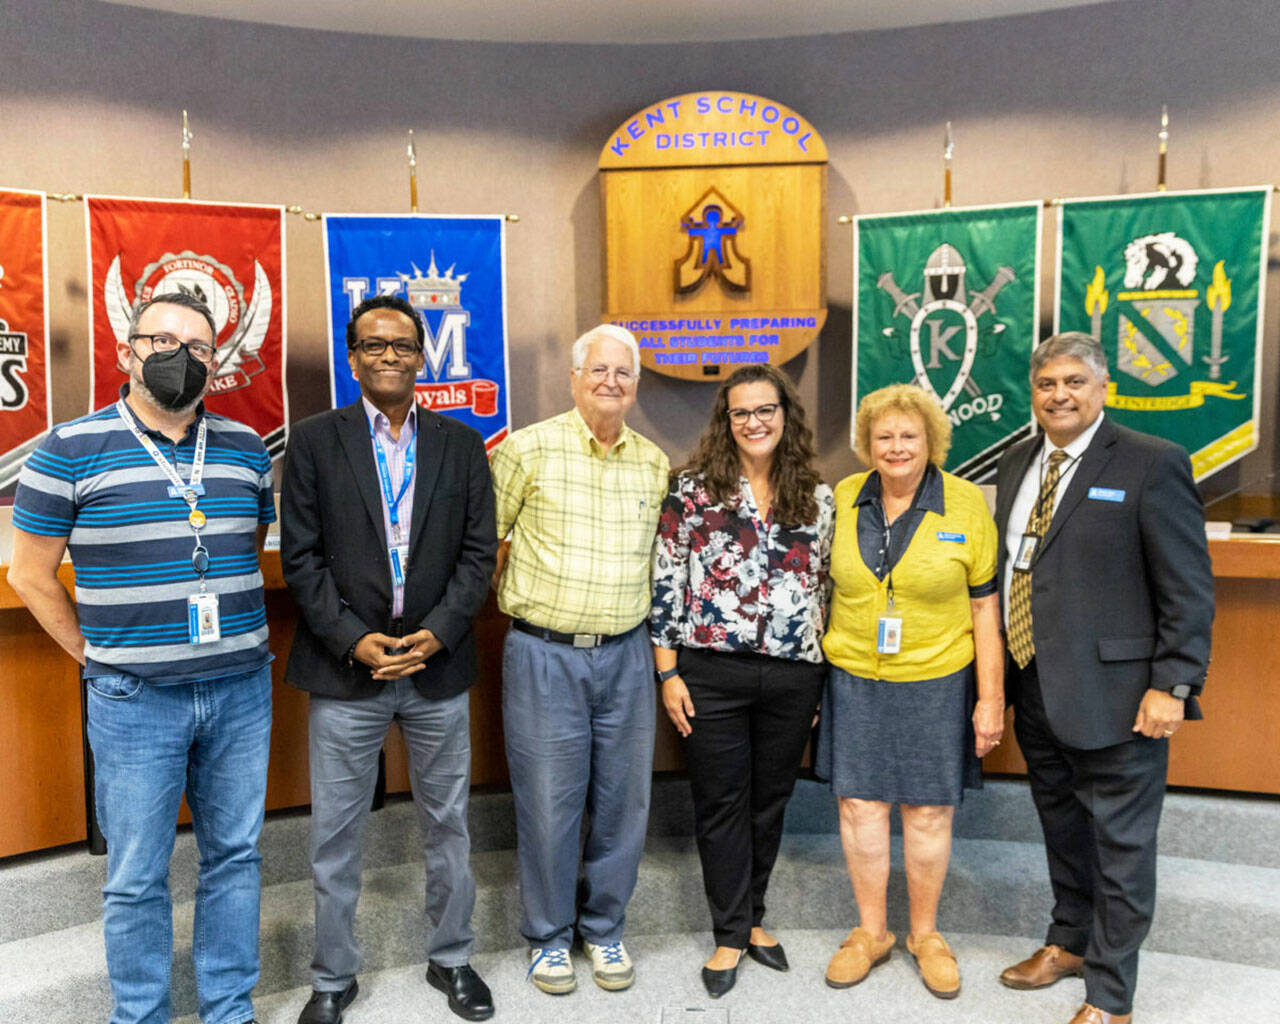 Kent School Board members, from left to right, Joe Bento, Awale Farah, Tim Clark, Meghin Margel and Leslie Hamada with Superintendent Israel Vela. COURTESY FILE PHOTO, Kent School District